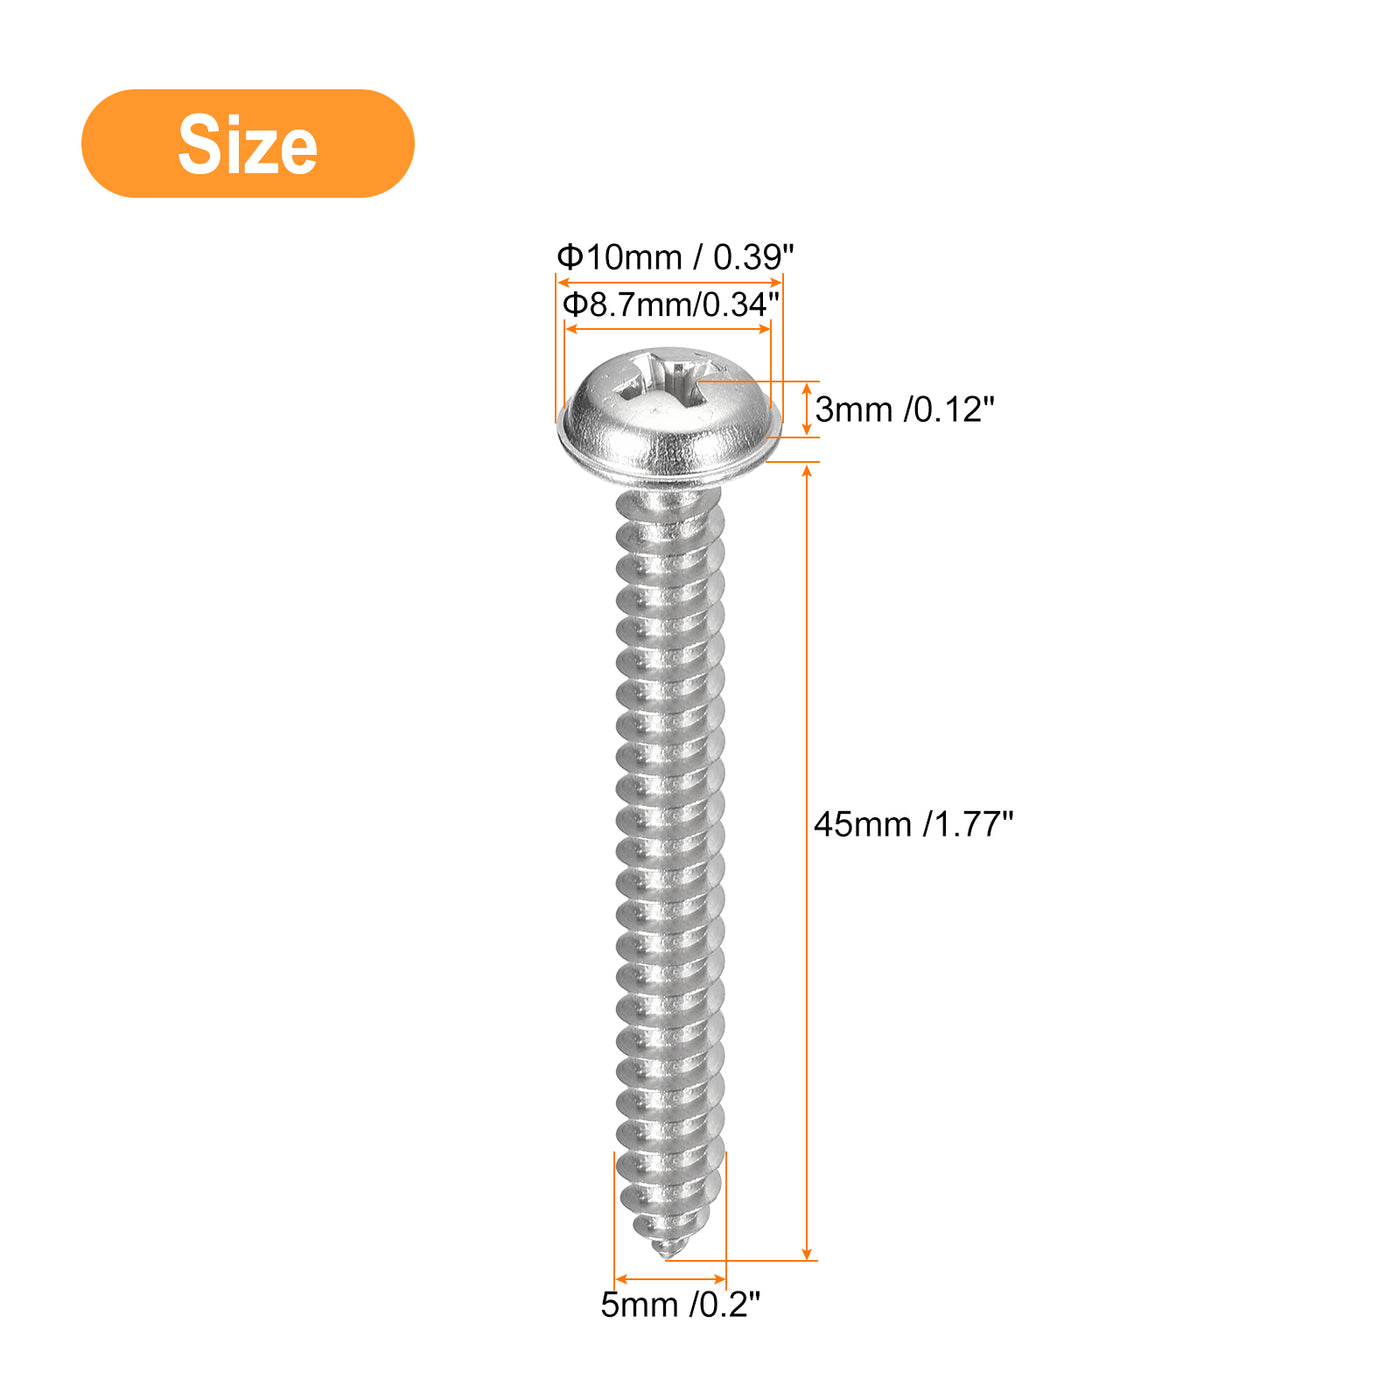 uxcell Uxcell ST5x45mm Phillips Pan Head Self-tapping Screw with Washer, 50pcs - 304 Stainless Steel Wood Screw Full Thread (Silver)